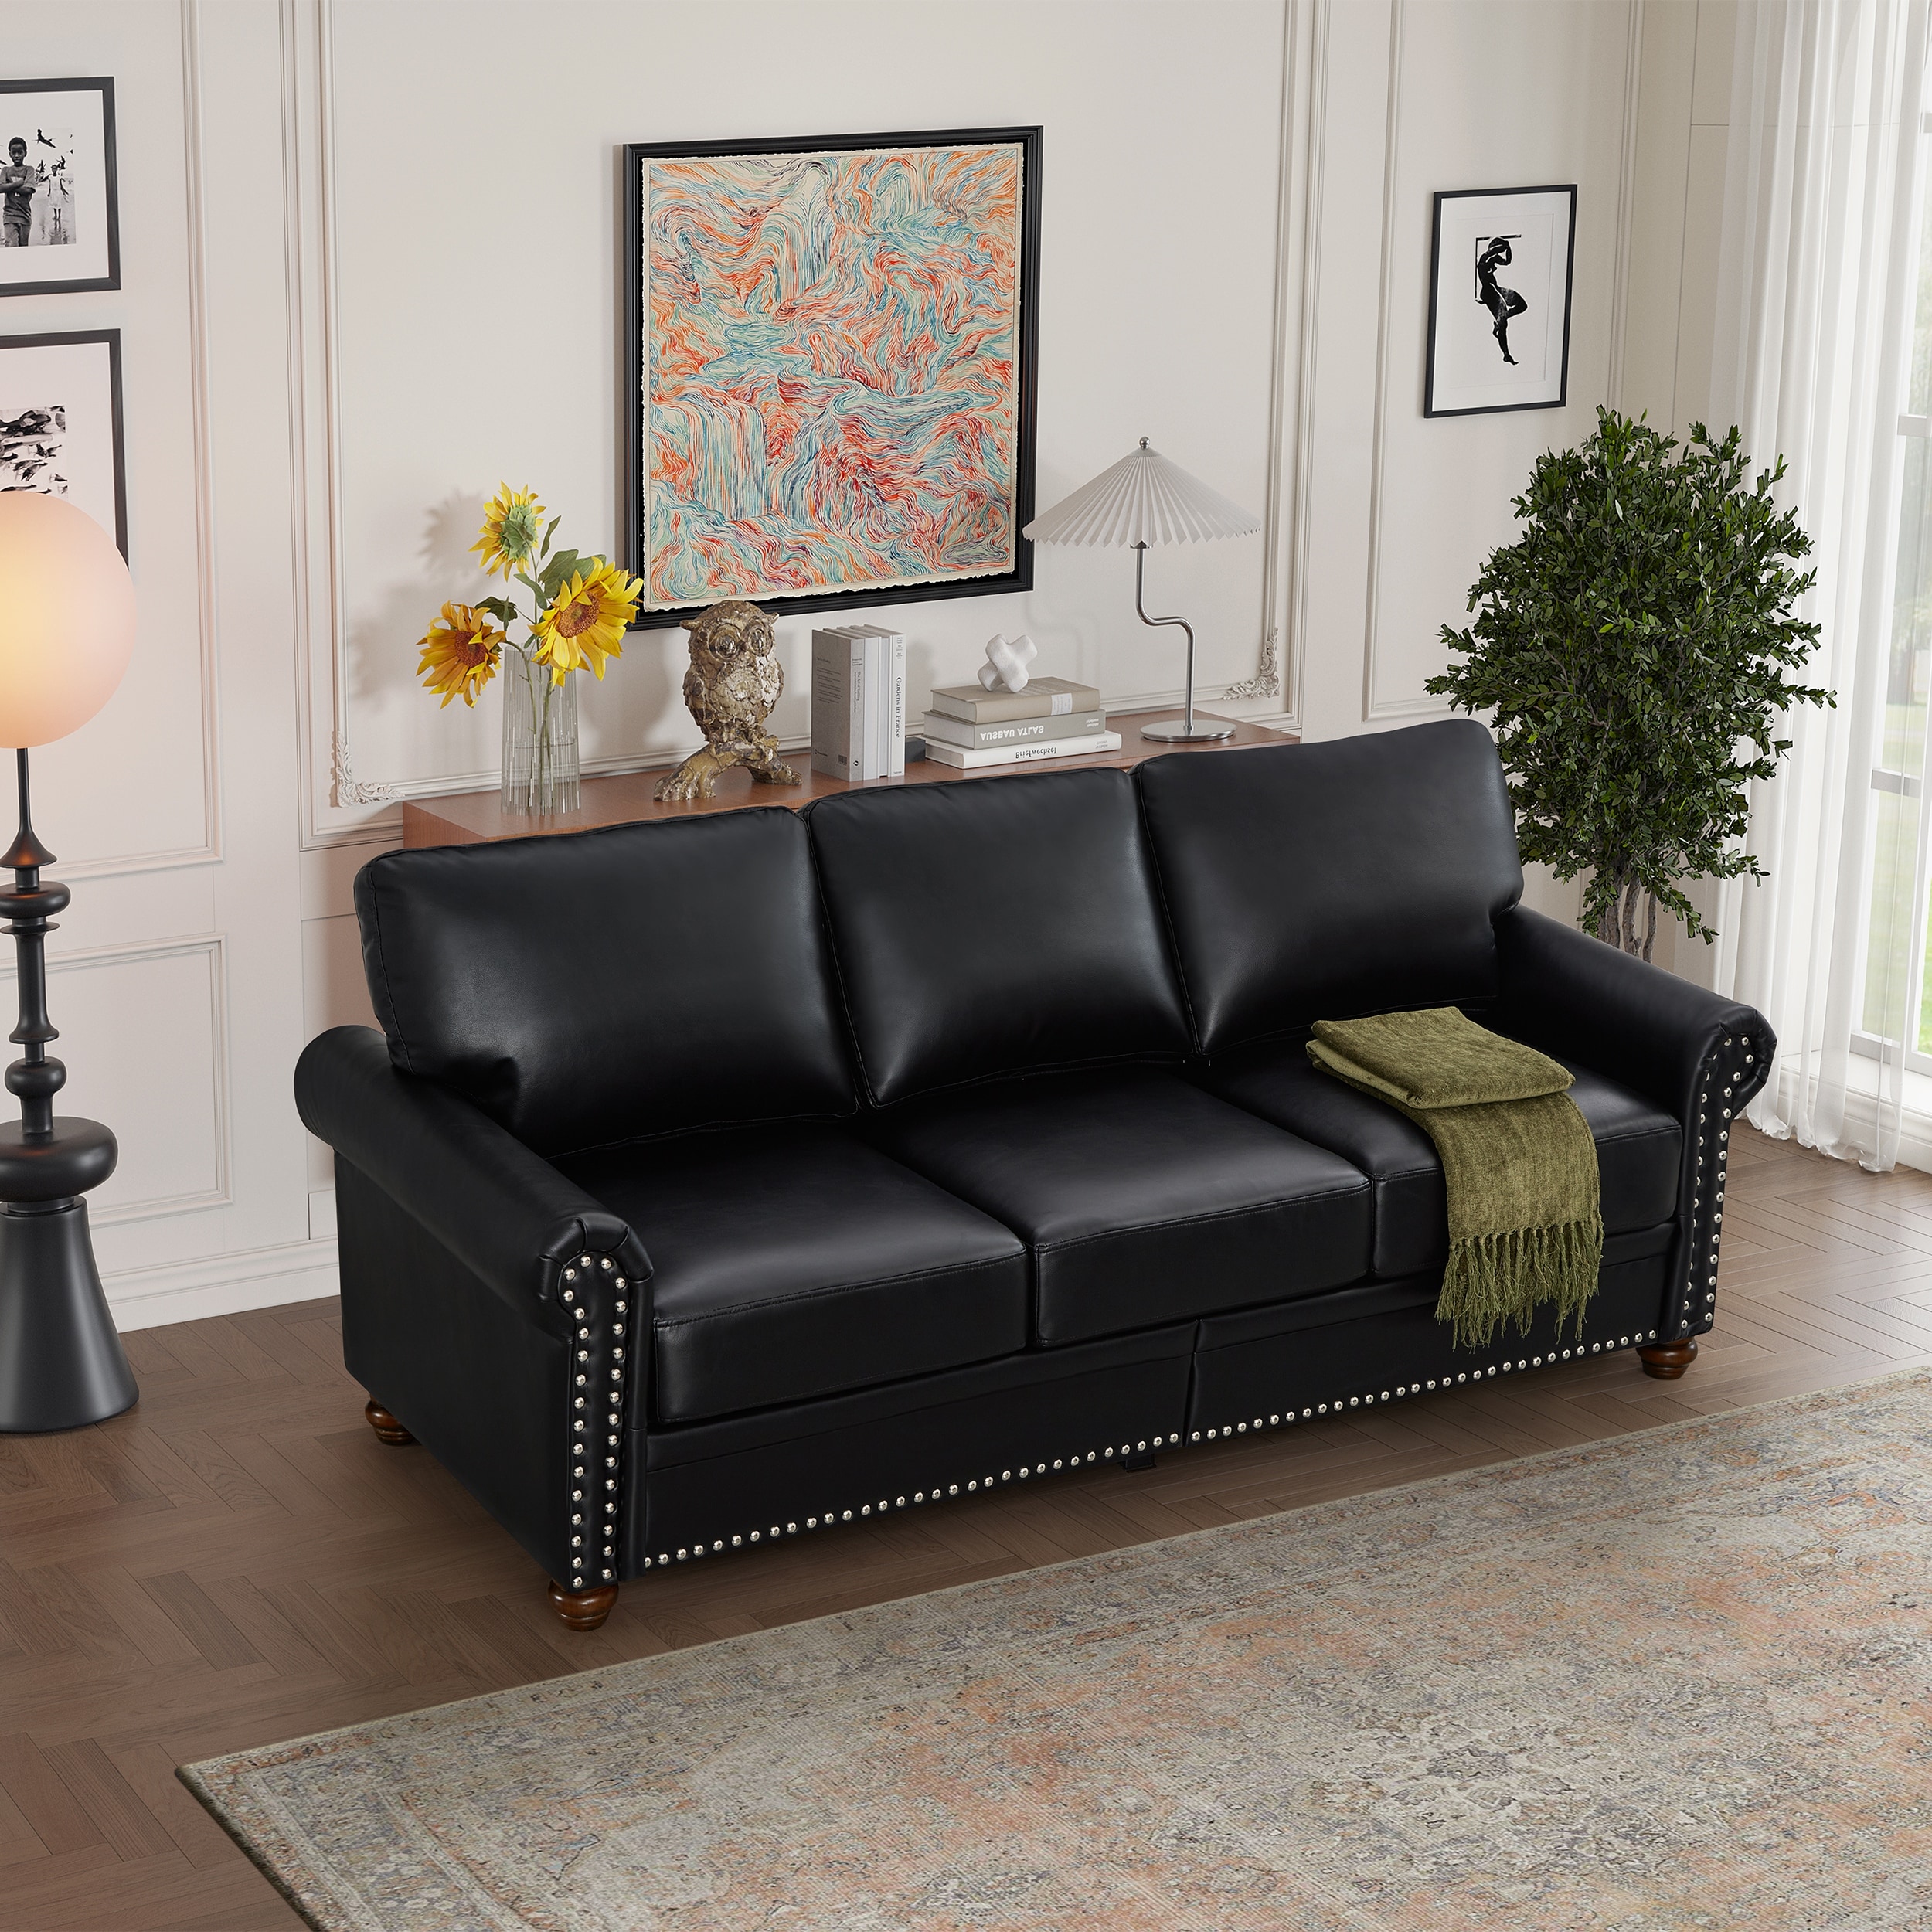 Faux Leather Sofas - Bed Bath & Beyond